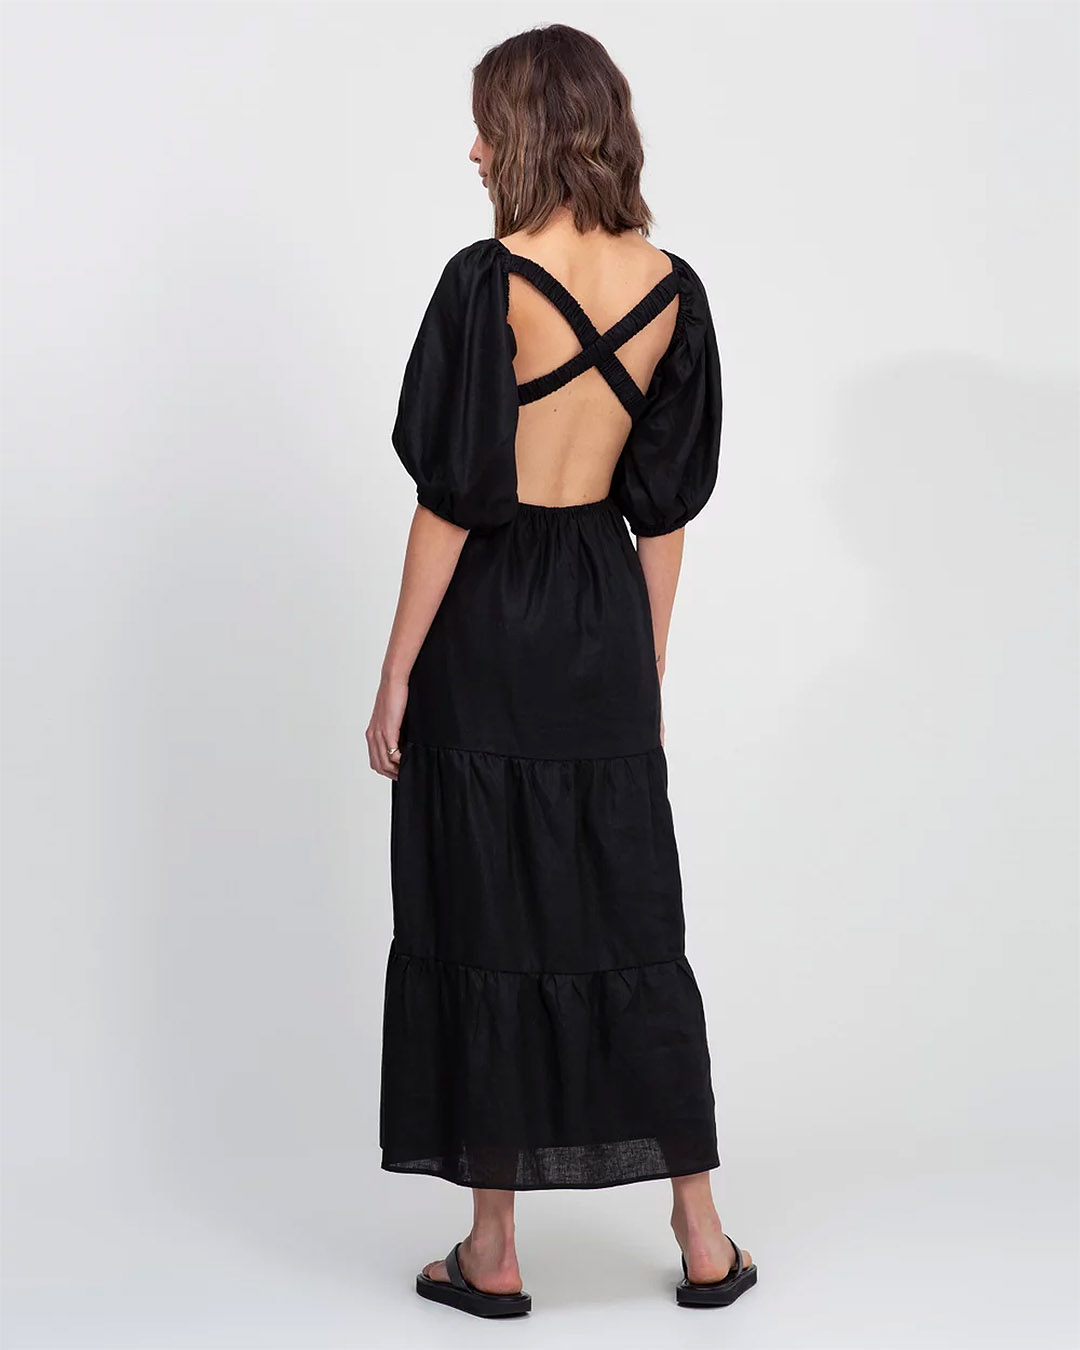 We see the back of a black women's dress with balloon sleeves and crossed straps on a back cutout. 